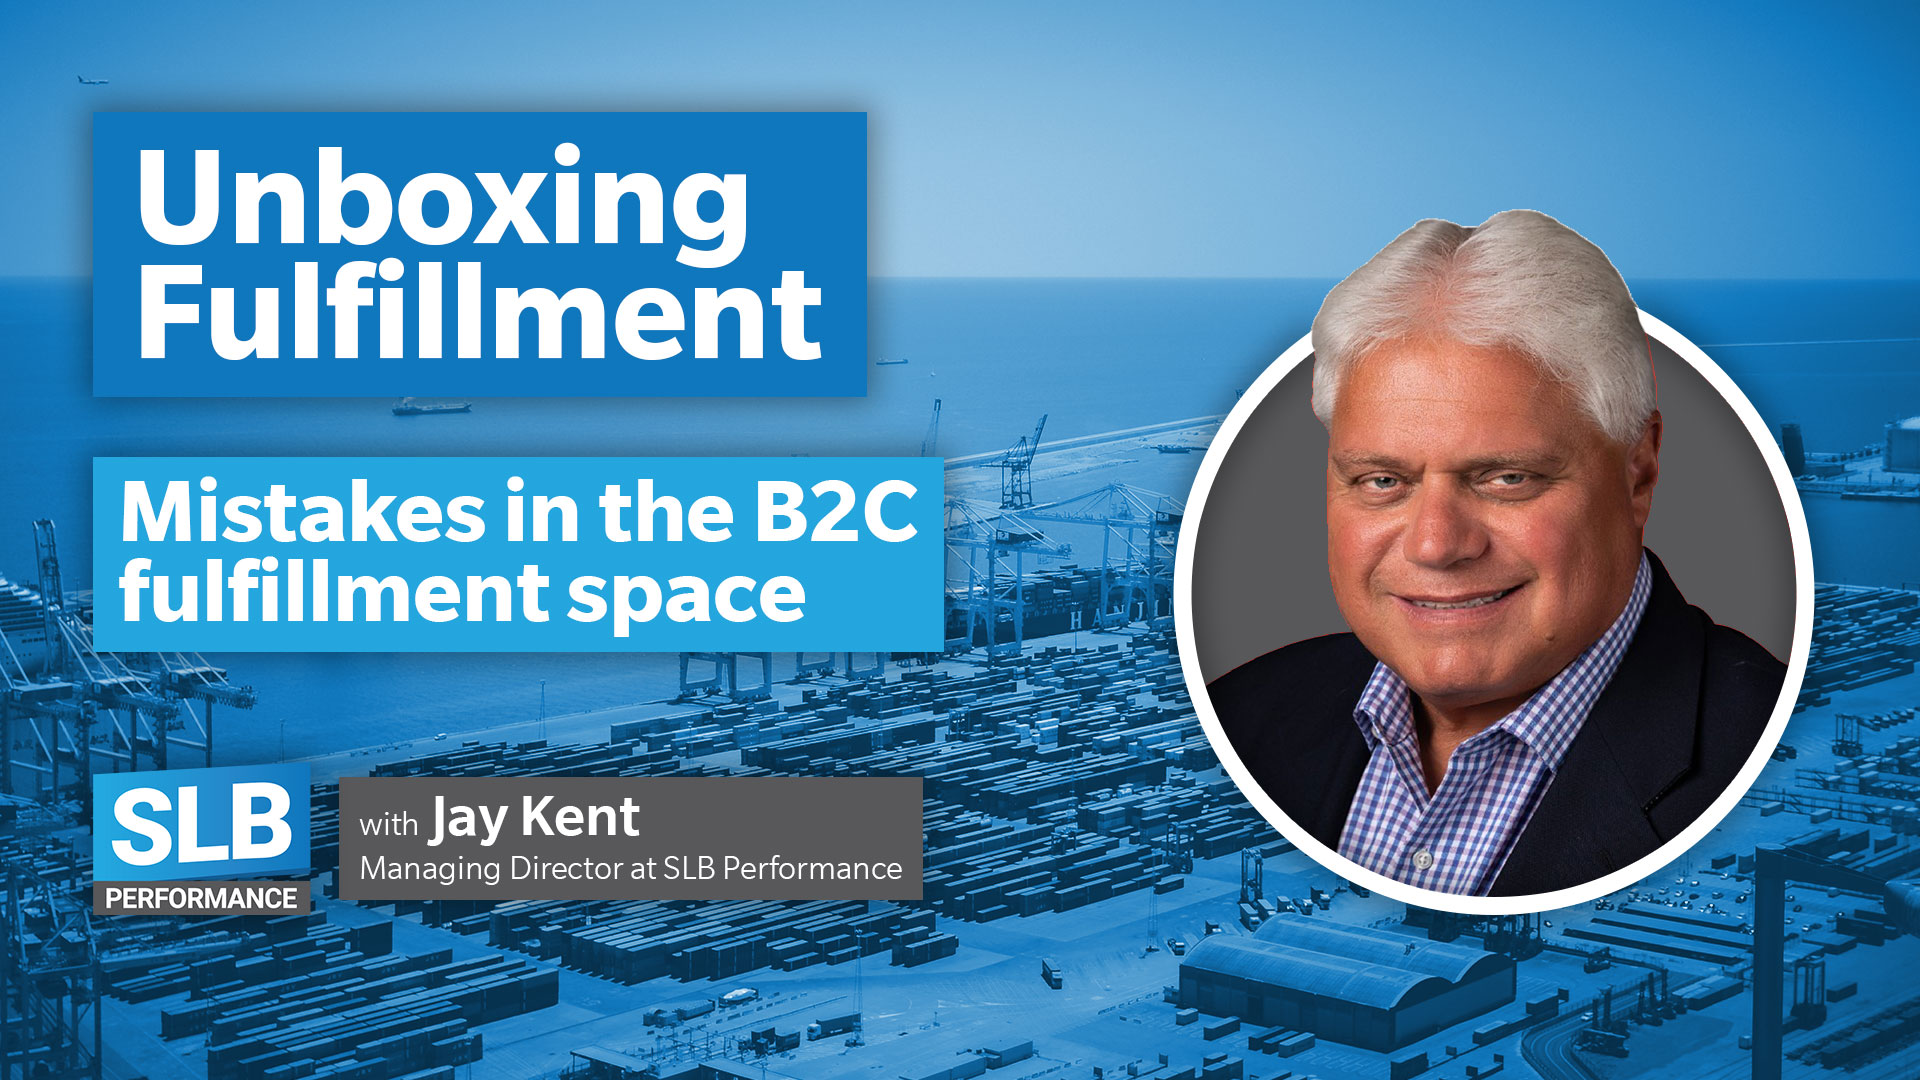 Mistakes in the B2C fulfillment space